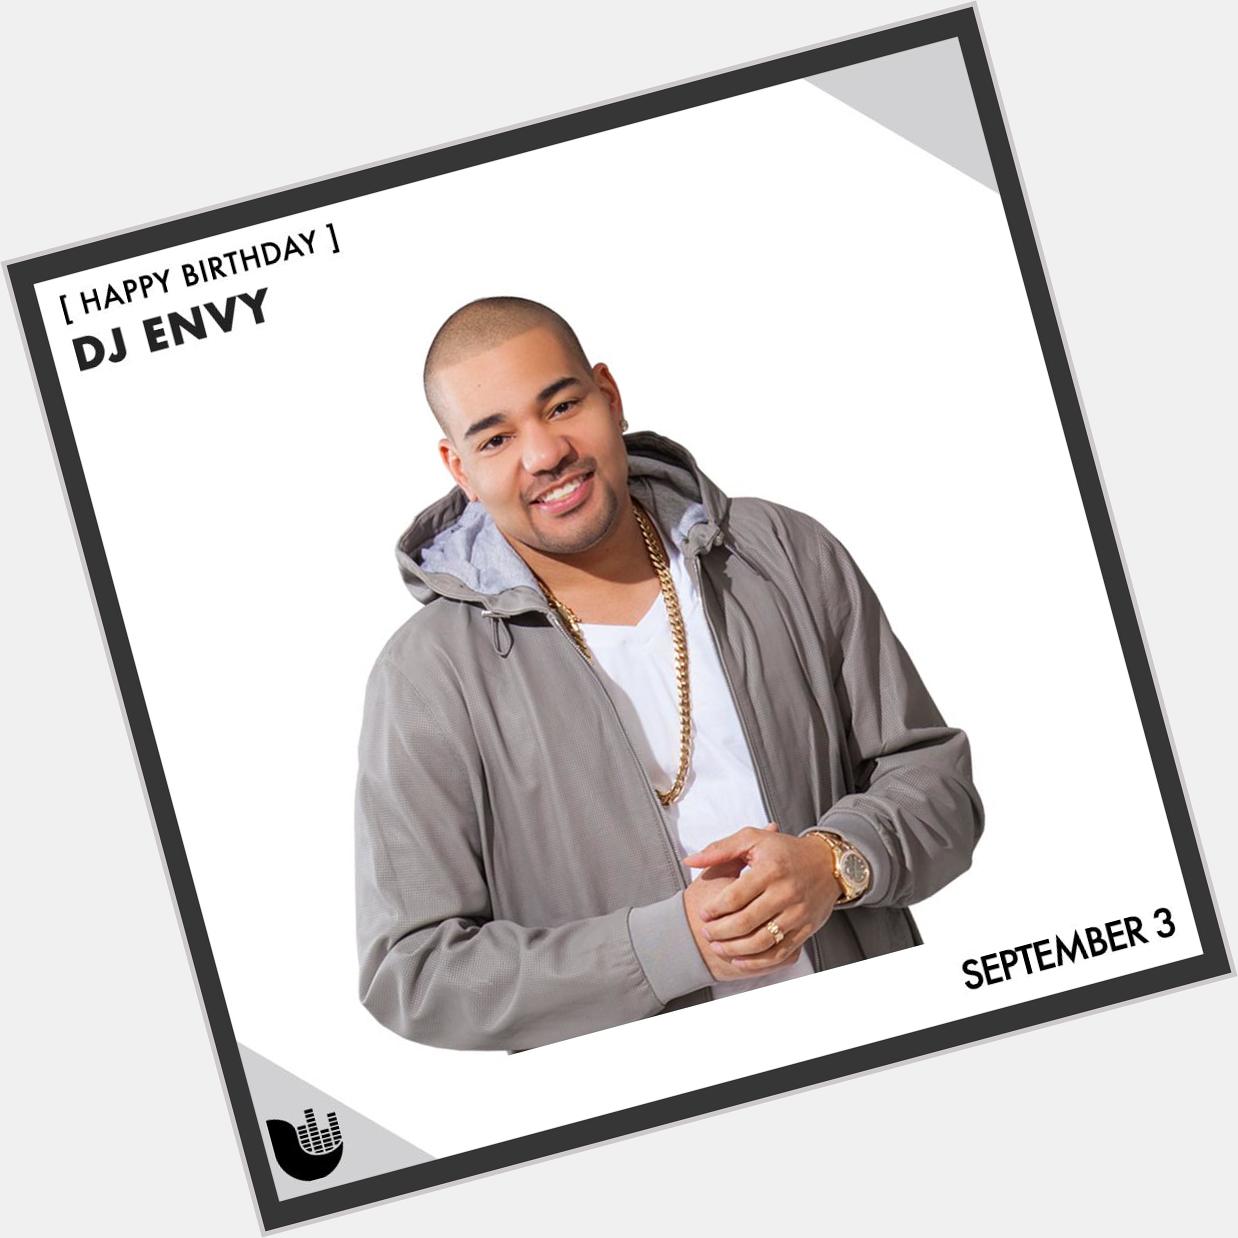 Join 98.5 The Beat in wishing a happy birthday to DJ Envy of The Breakfast Club today! 